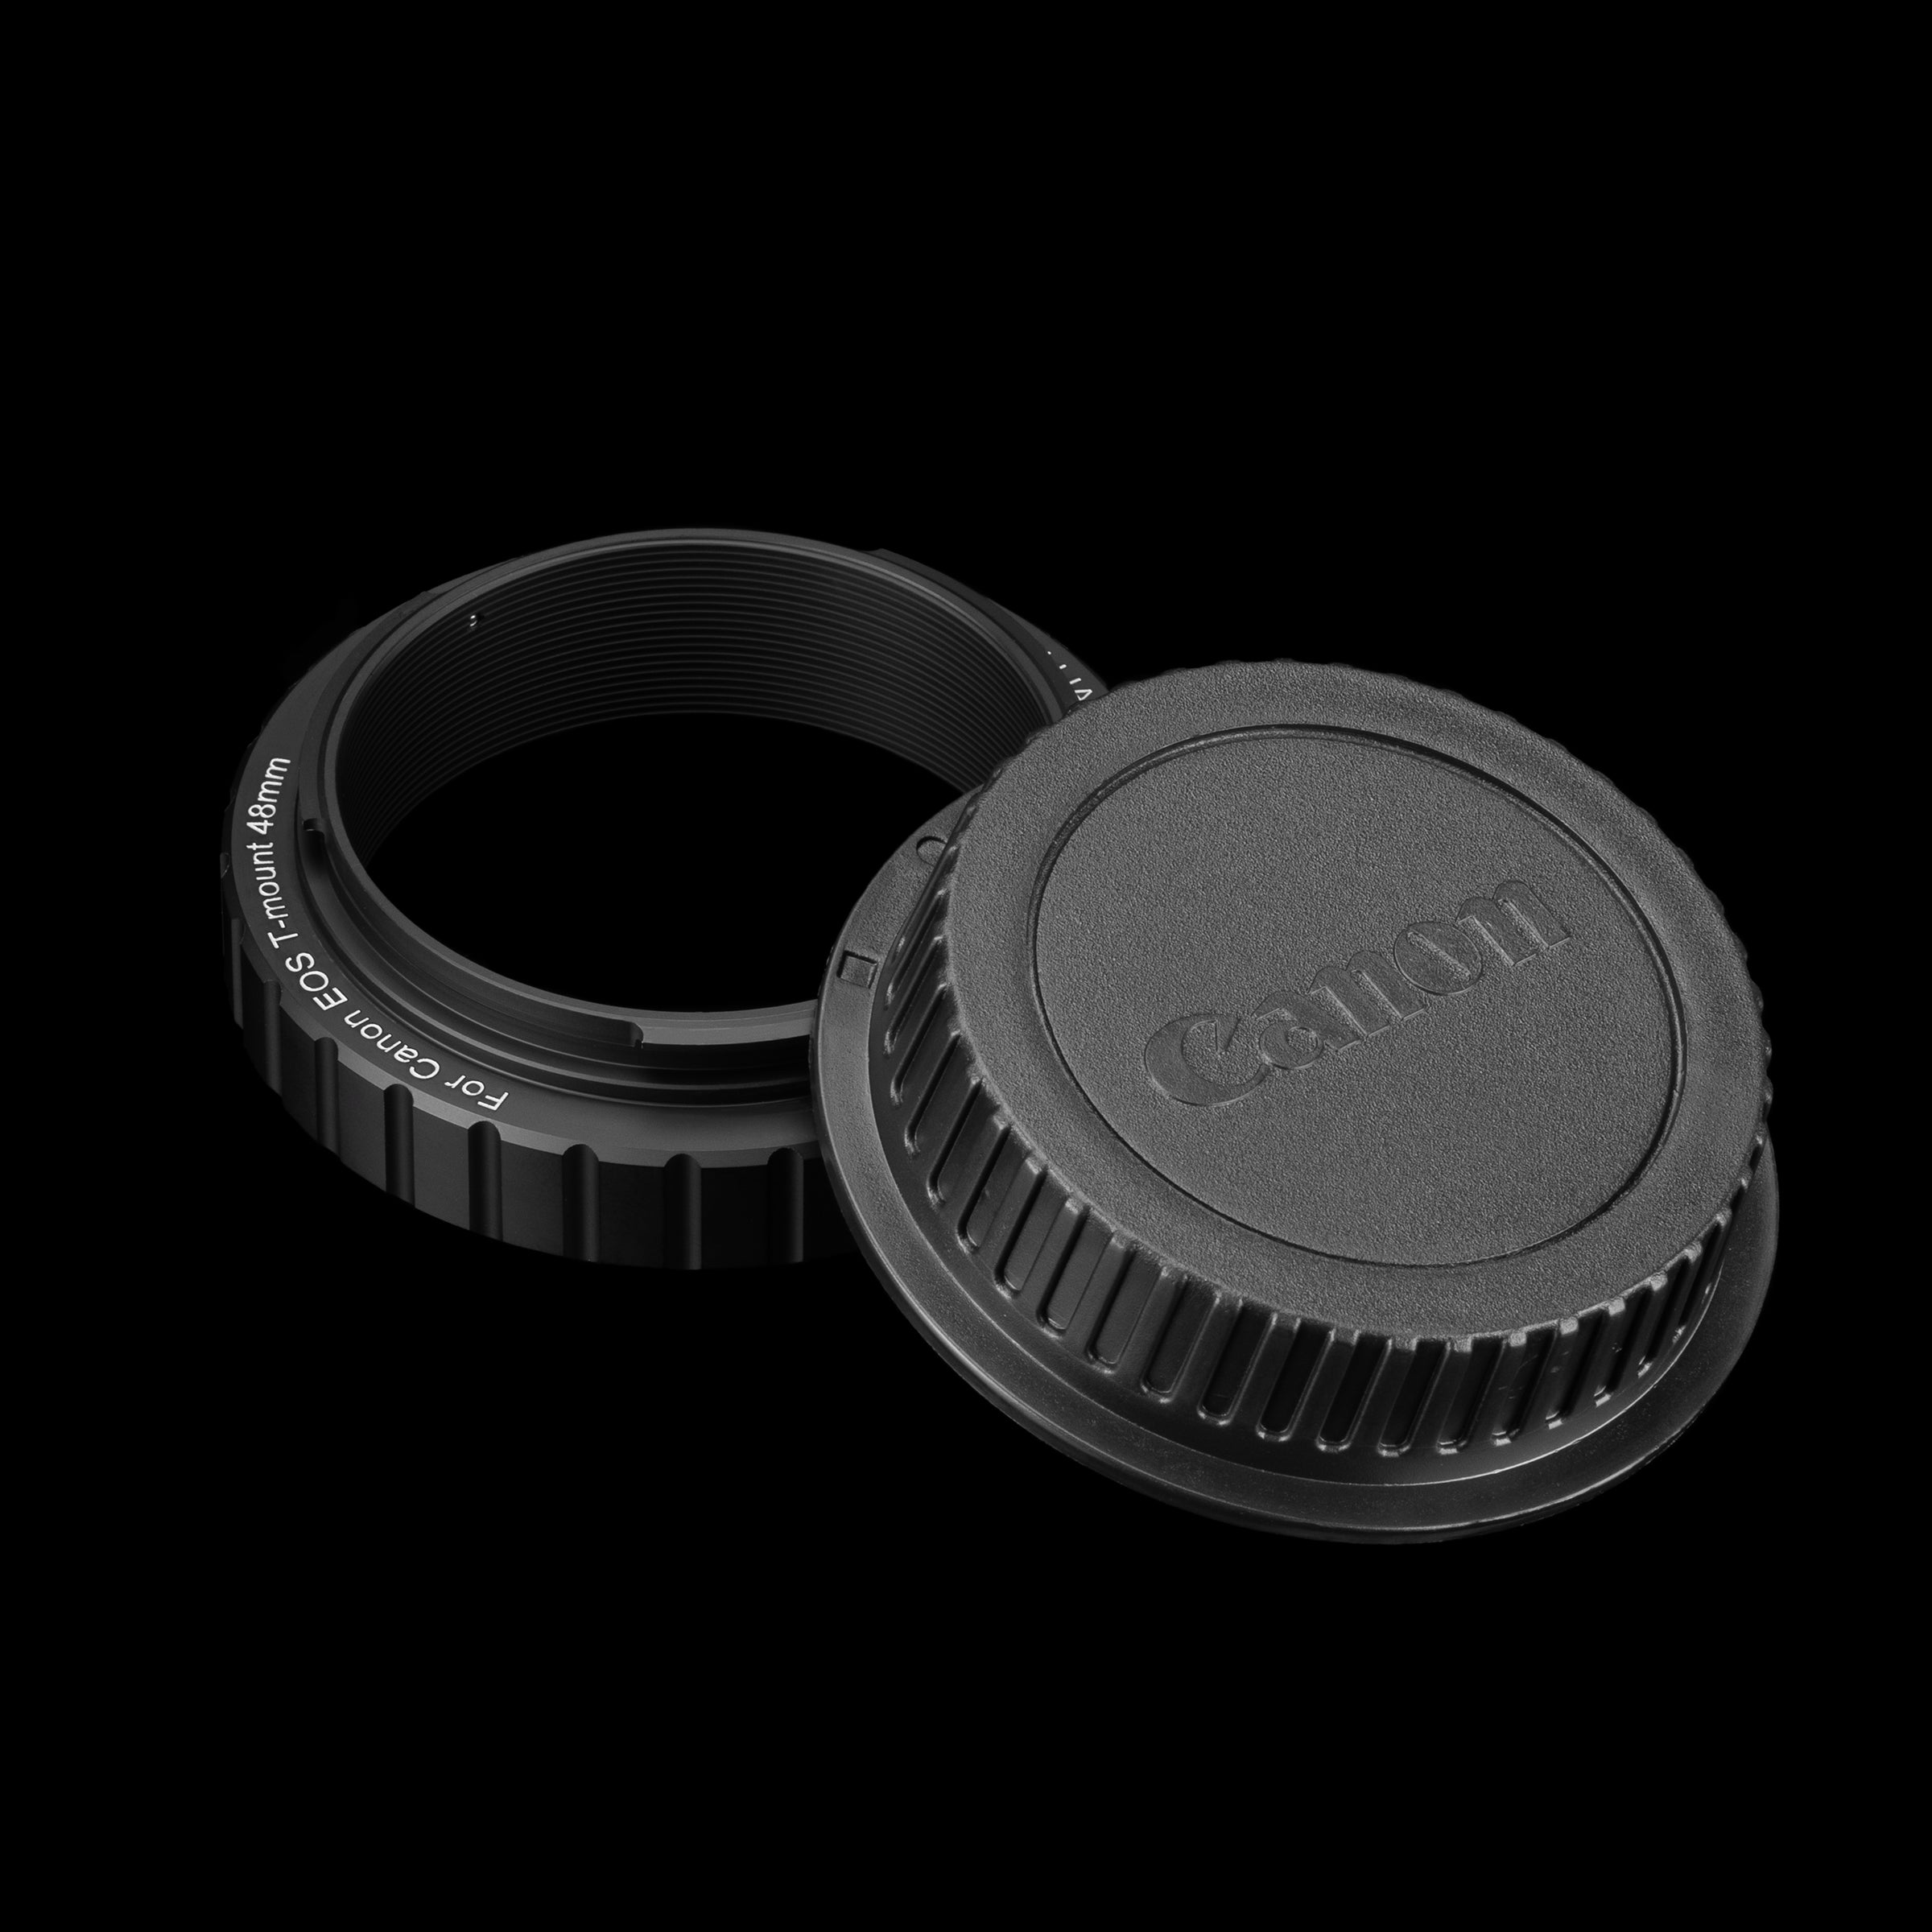 48mm T mount for Canon EOS